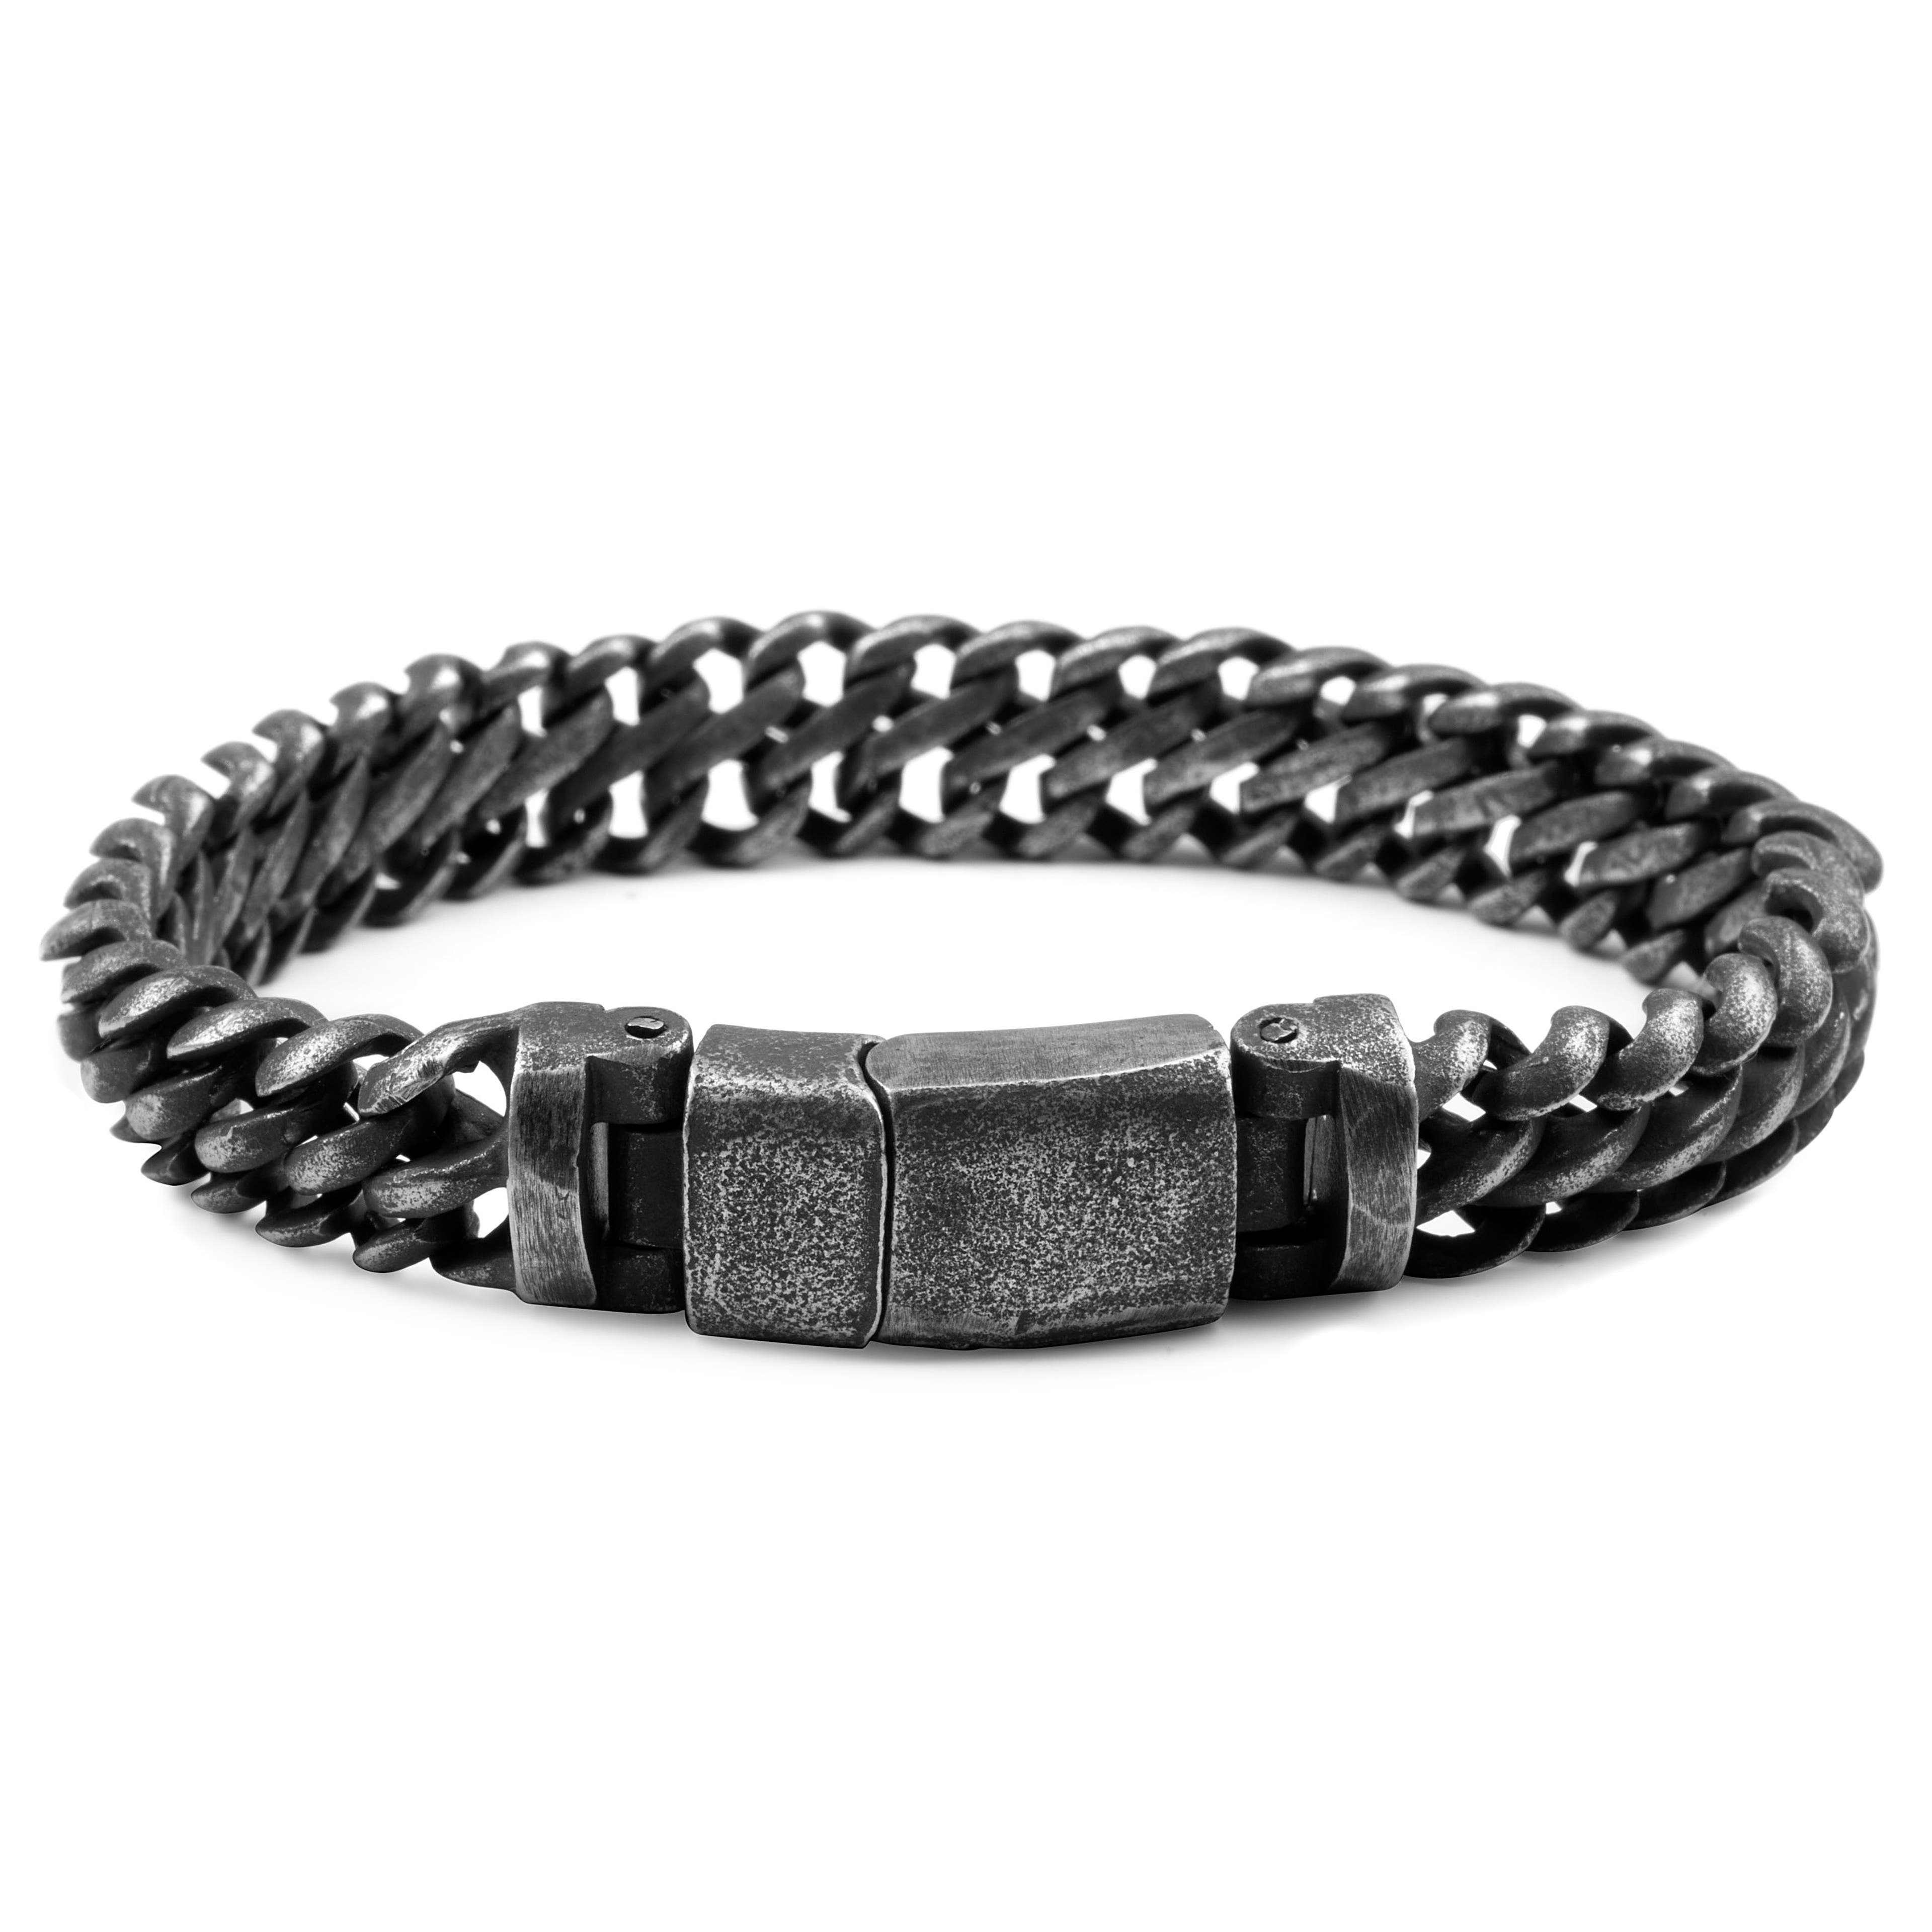 Rustic Stainless Steel Double Curb Chain Bracelet